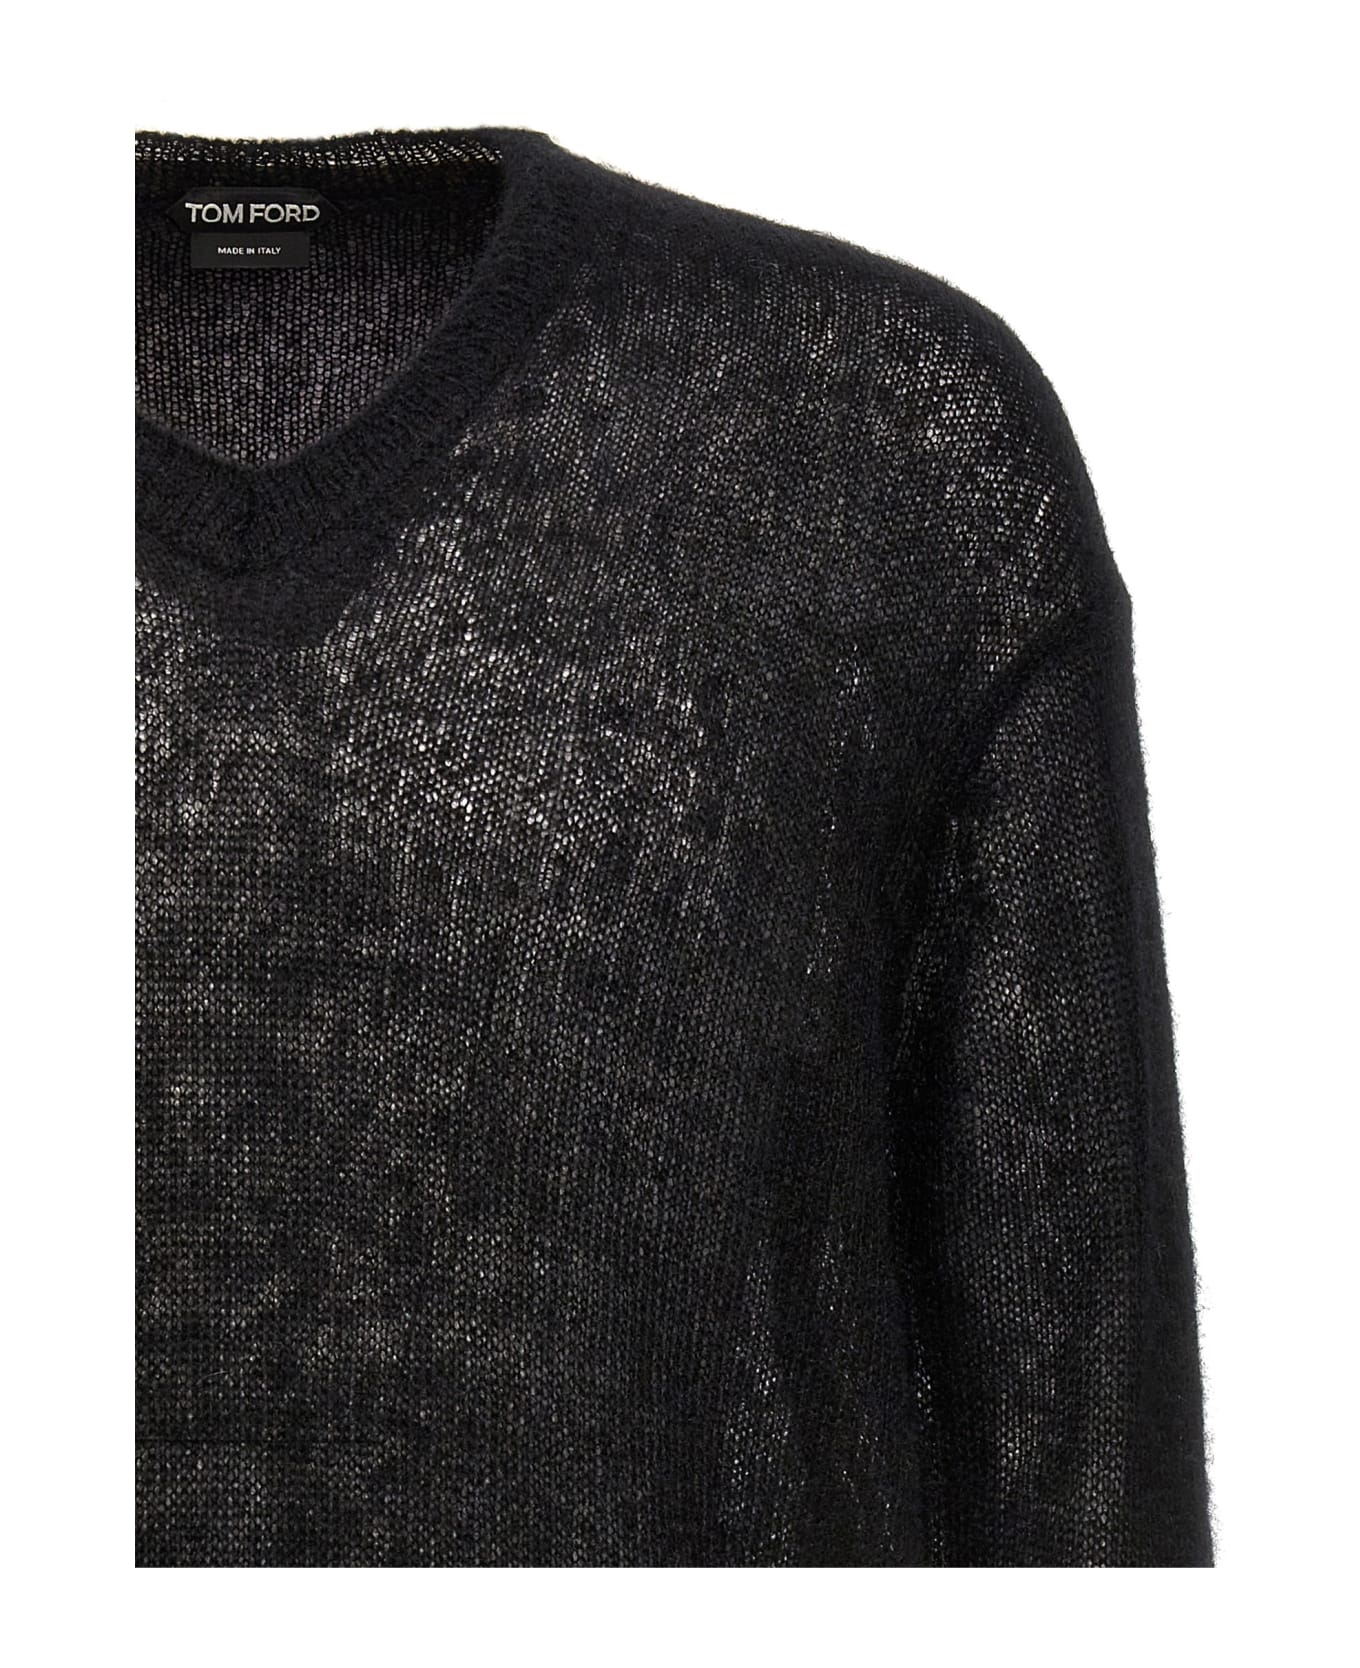 Tom Ford Mohair Sweater - Black